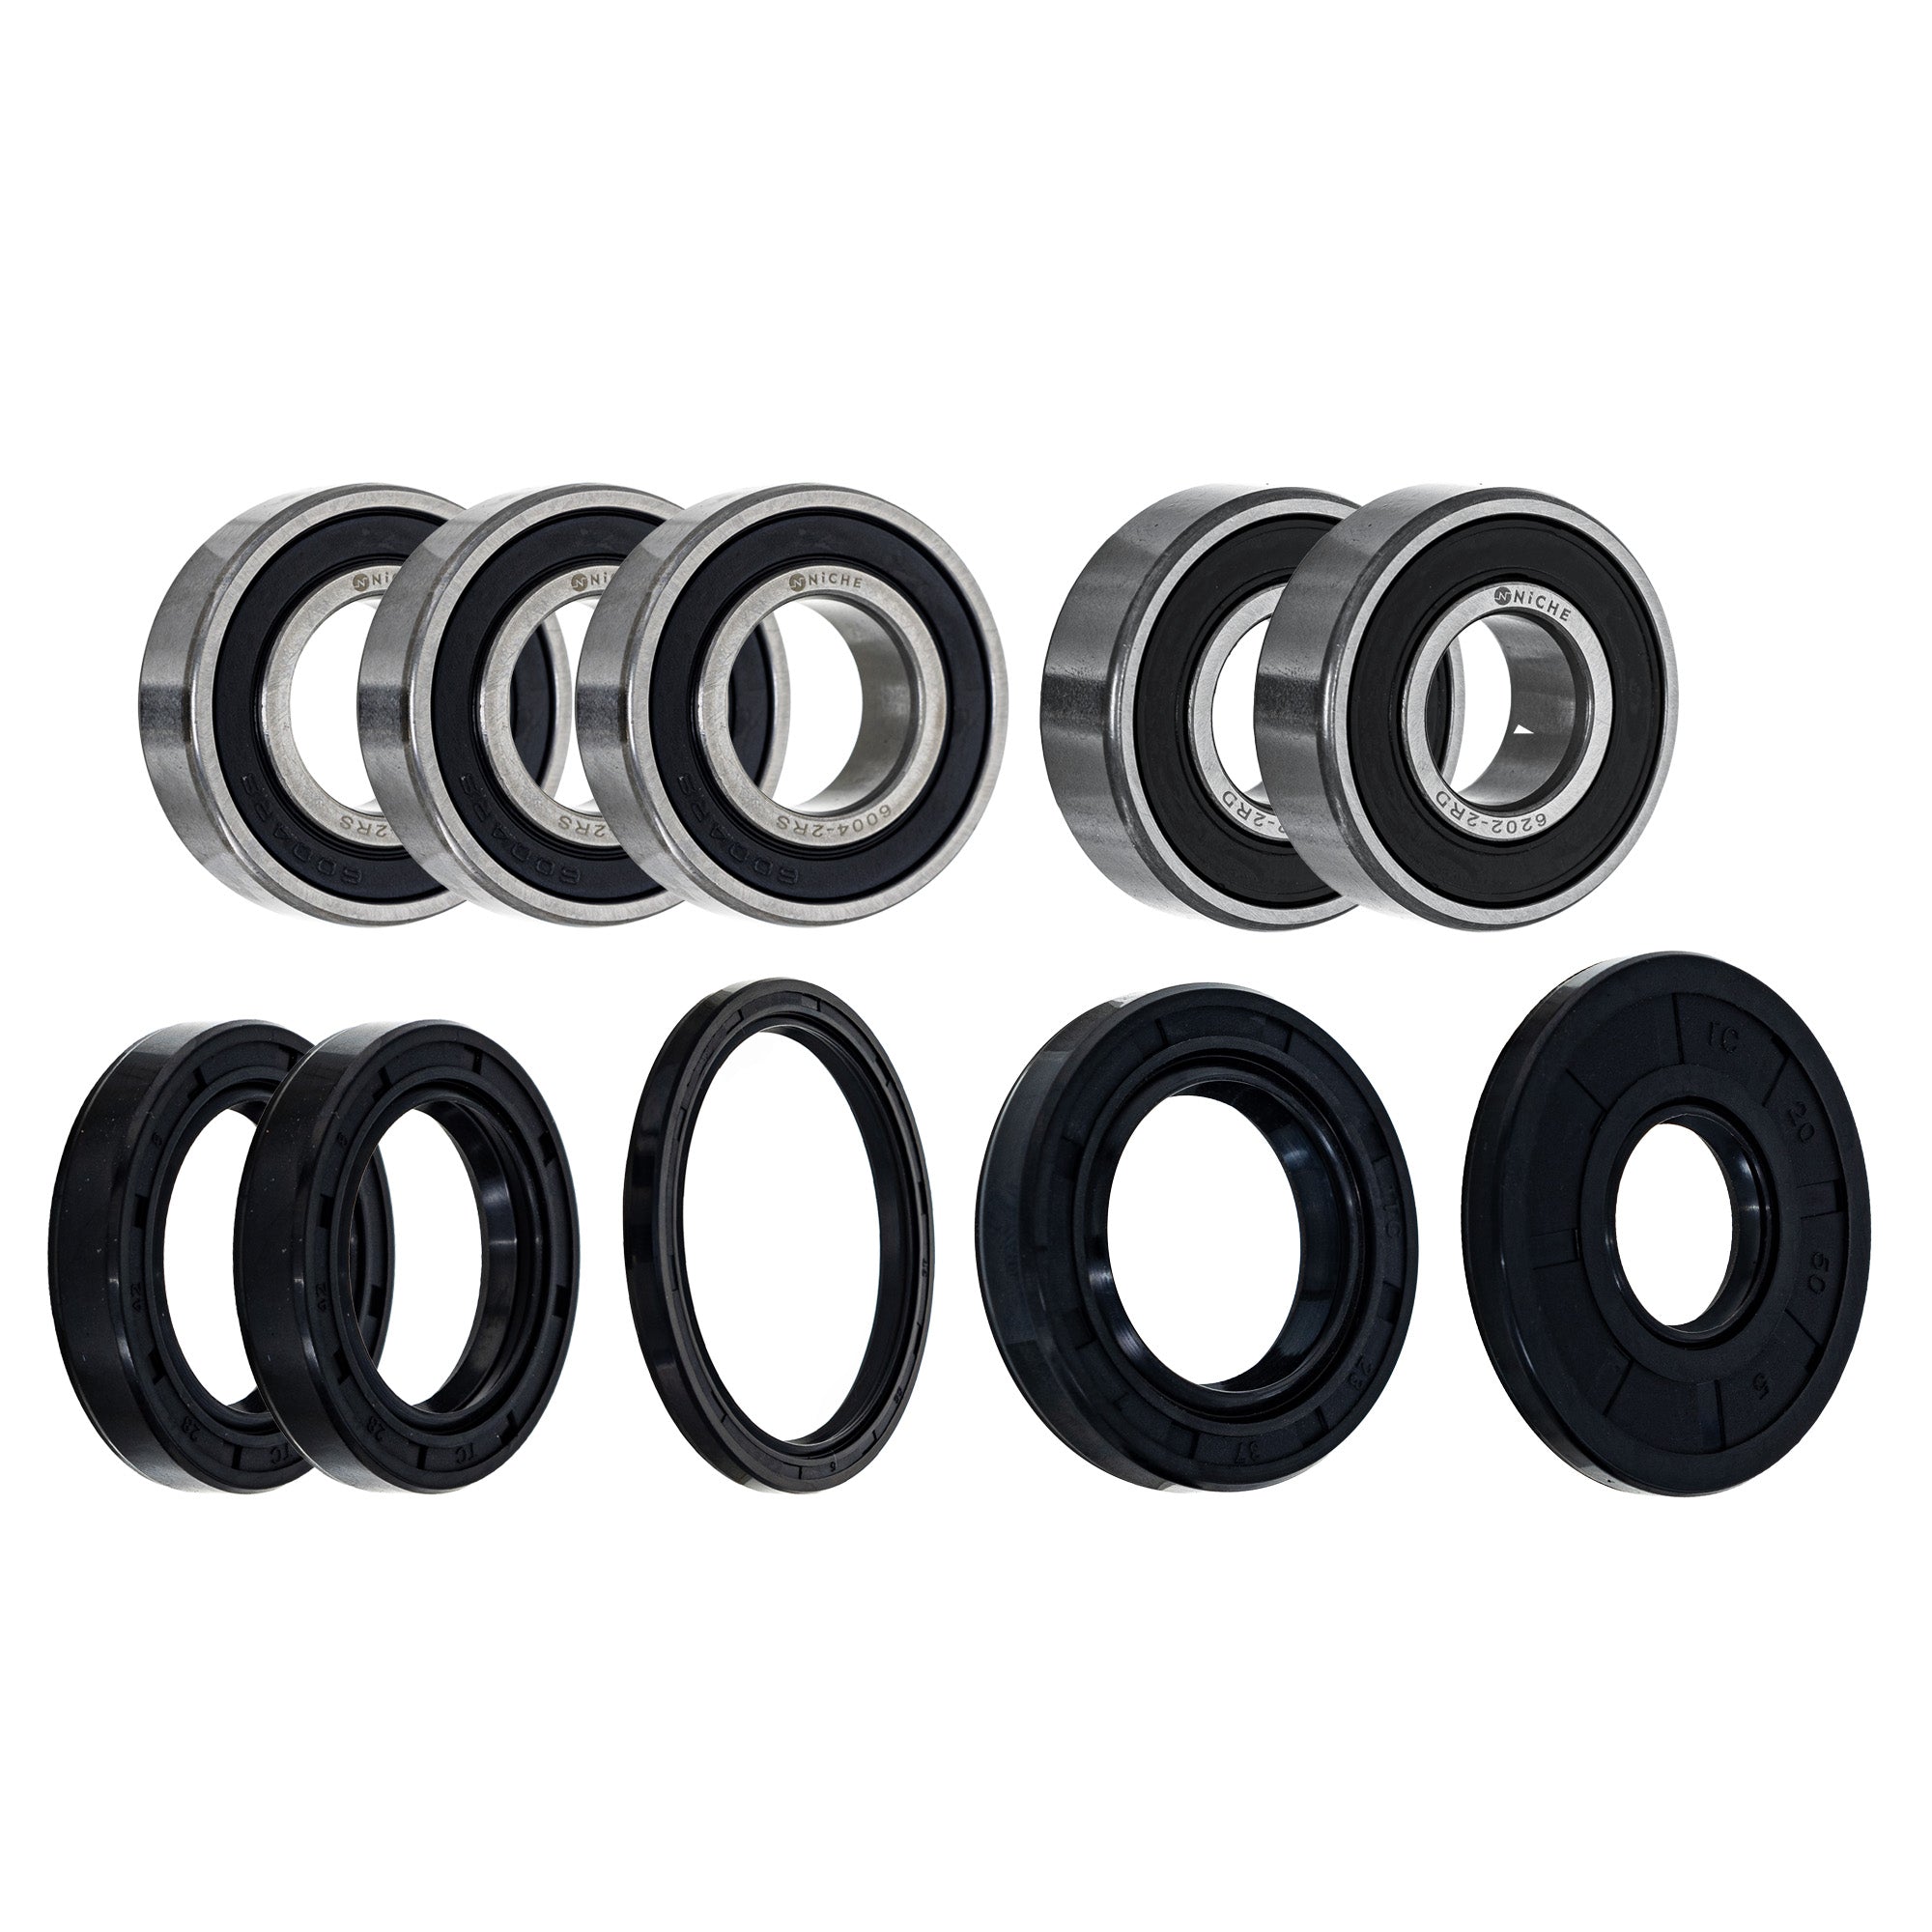 Wheel Bearing Seal Kit for zOTHER Ref No CR250R CR125R NICHE MK1008797